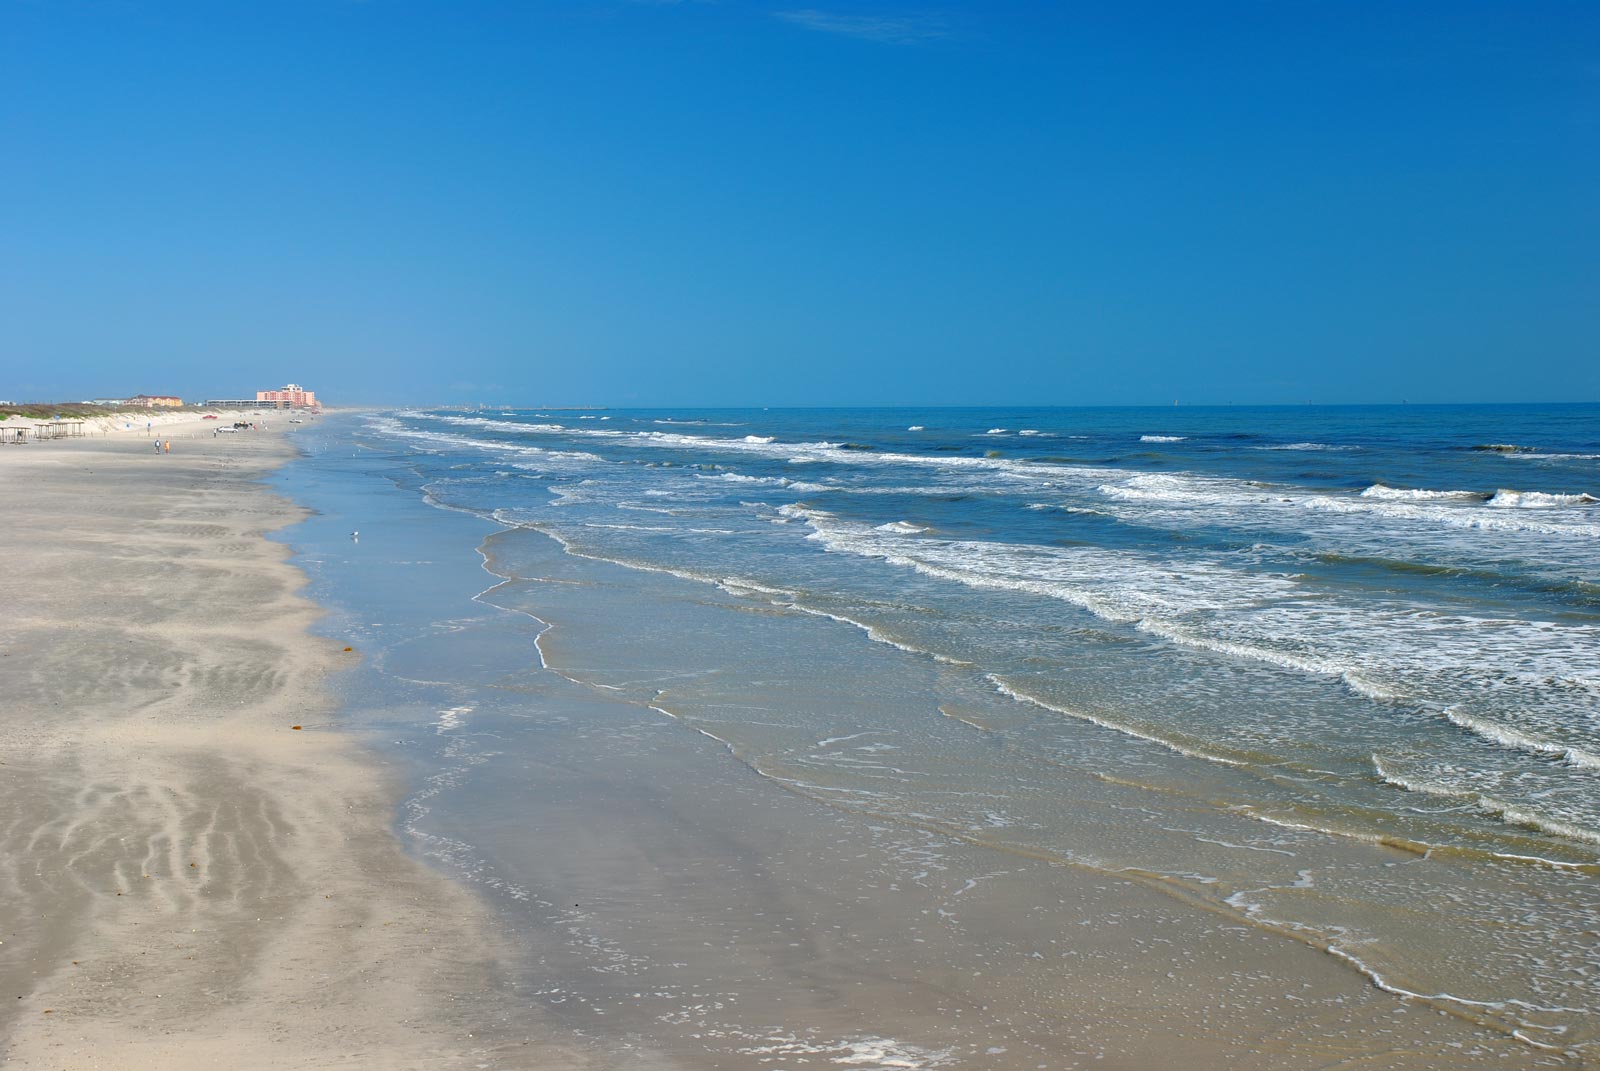 21 Things to do on South Padre Island, Texas - The Planet D